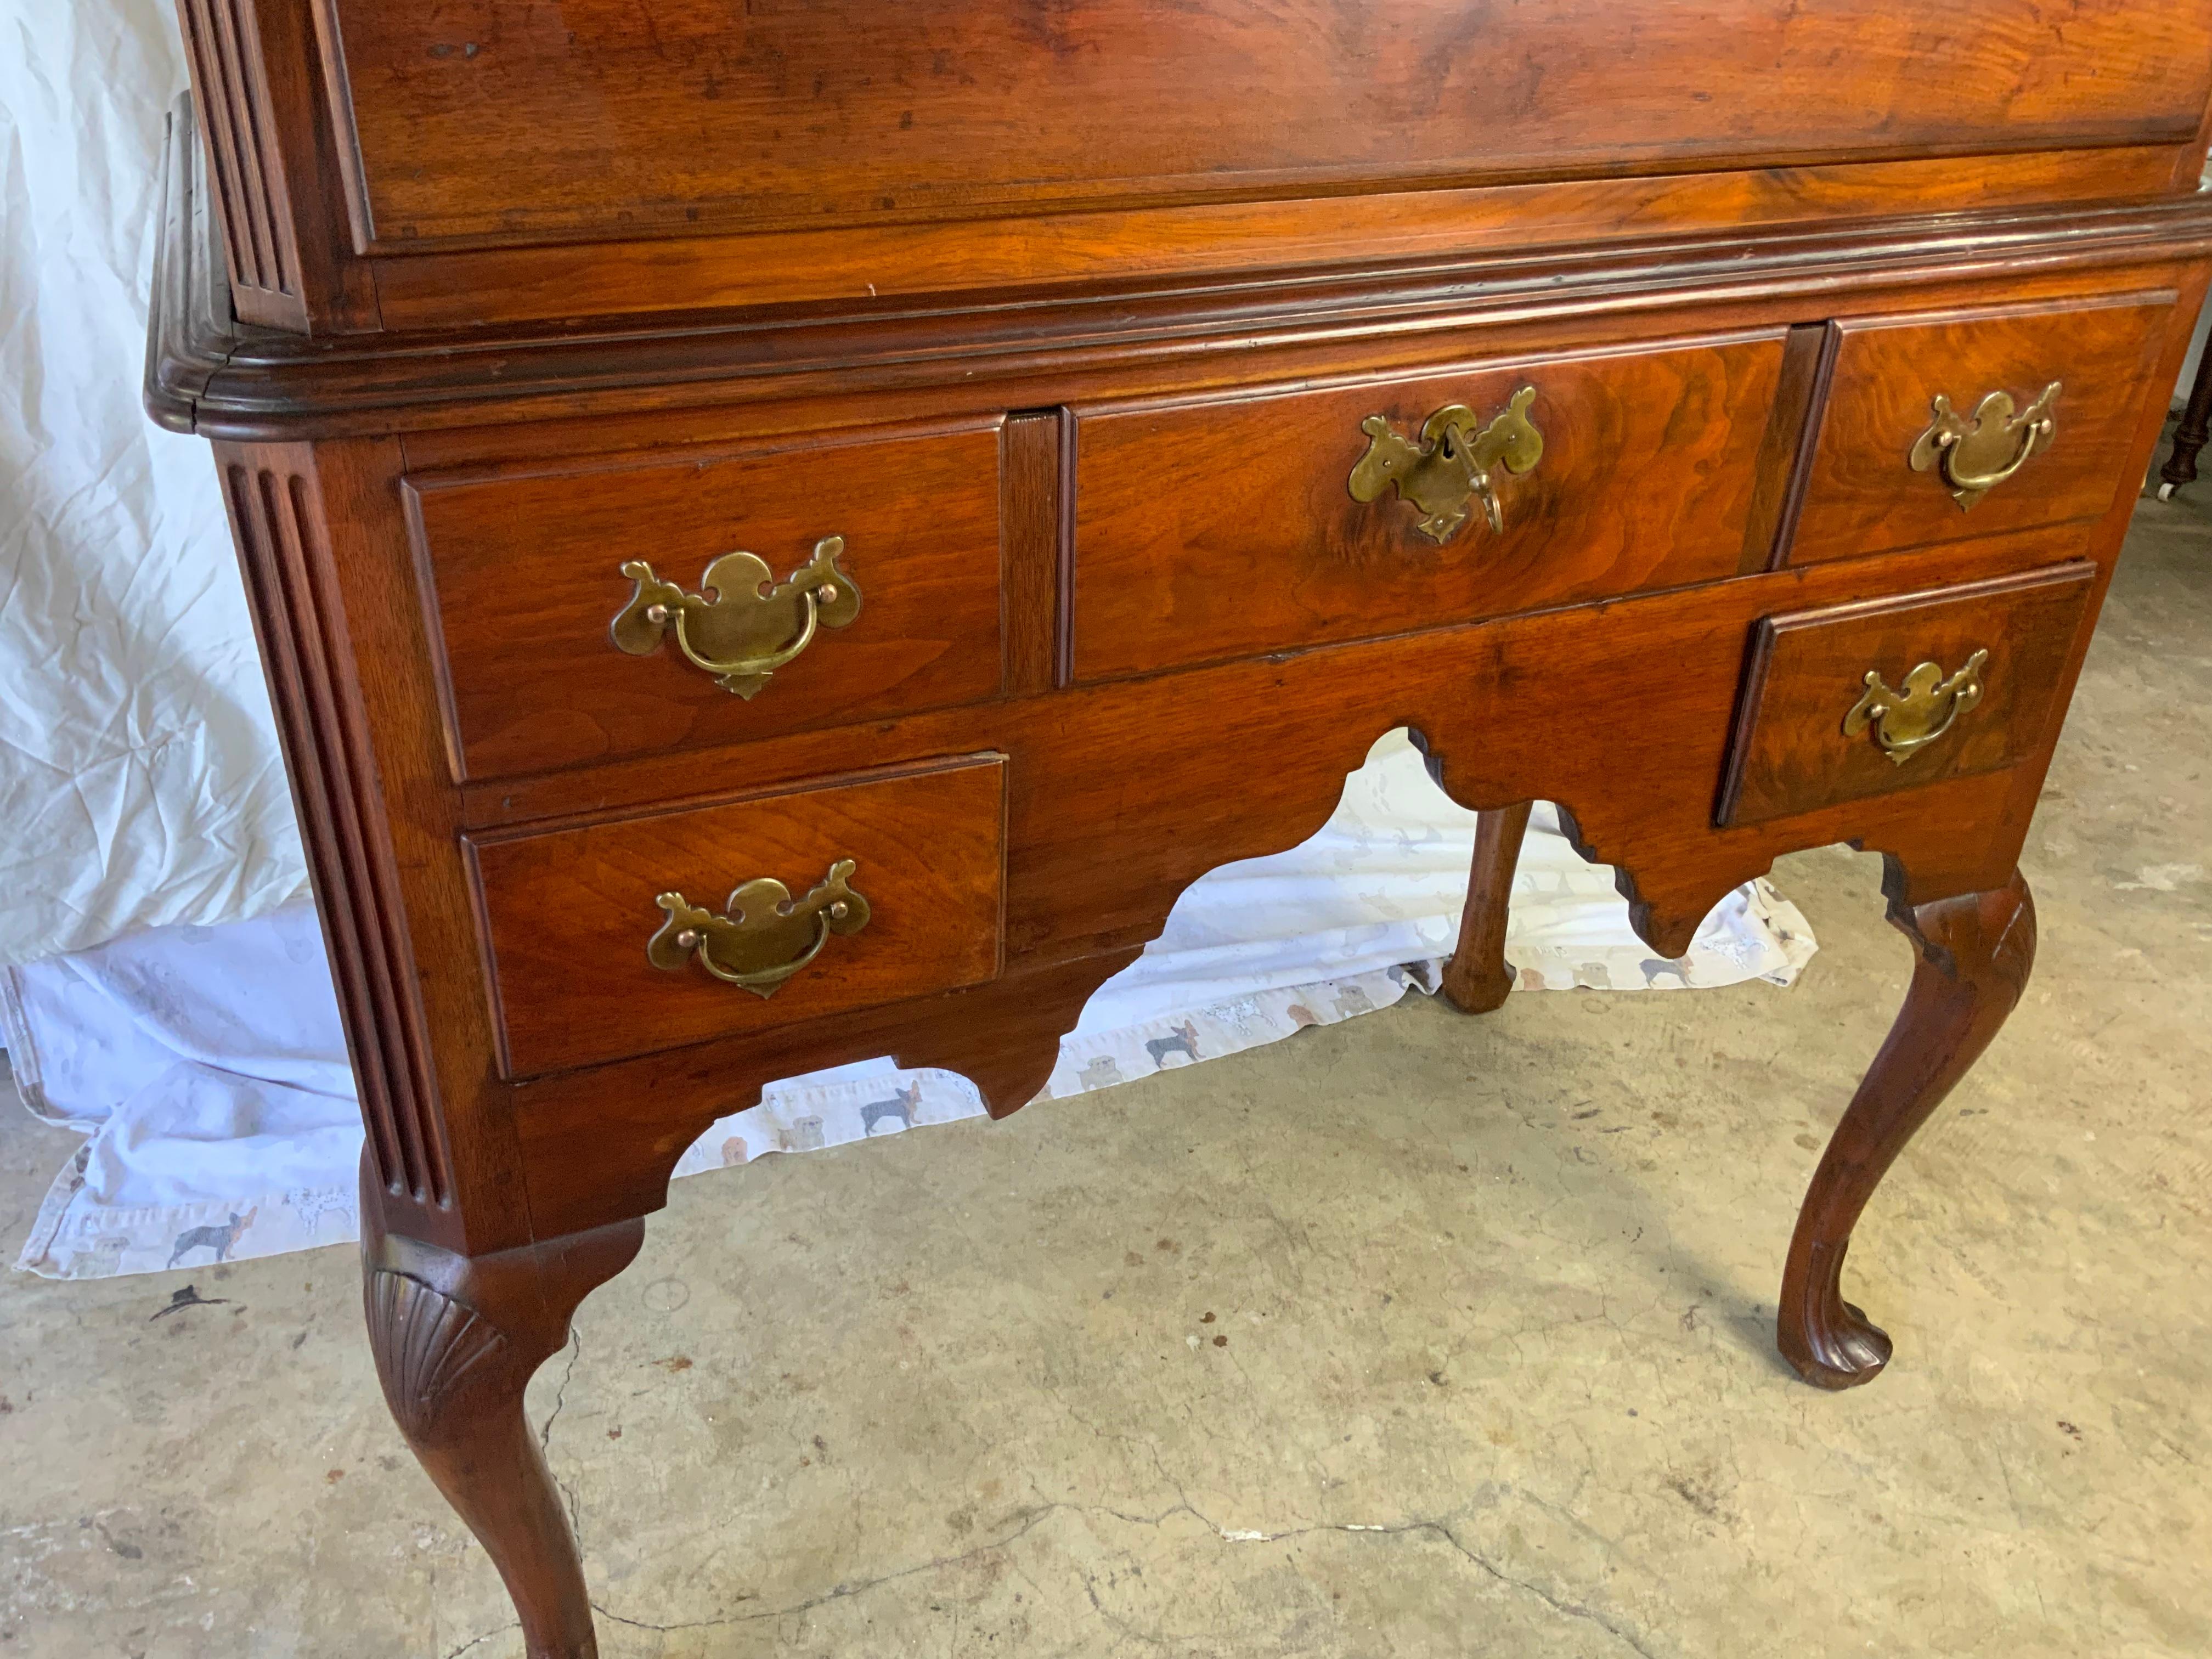 A very nice Walnut Queen Anne Flat top Highboy. This is a very nicely proportioned looking Highboy that I believe could possibly be a very old marriage of two 18th century pieces.  All the woods, color, patina, hardware. and construction of the two